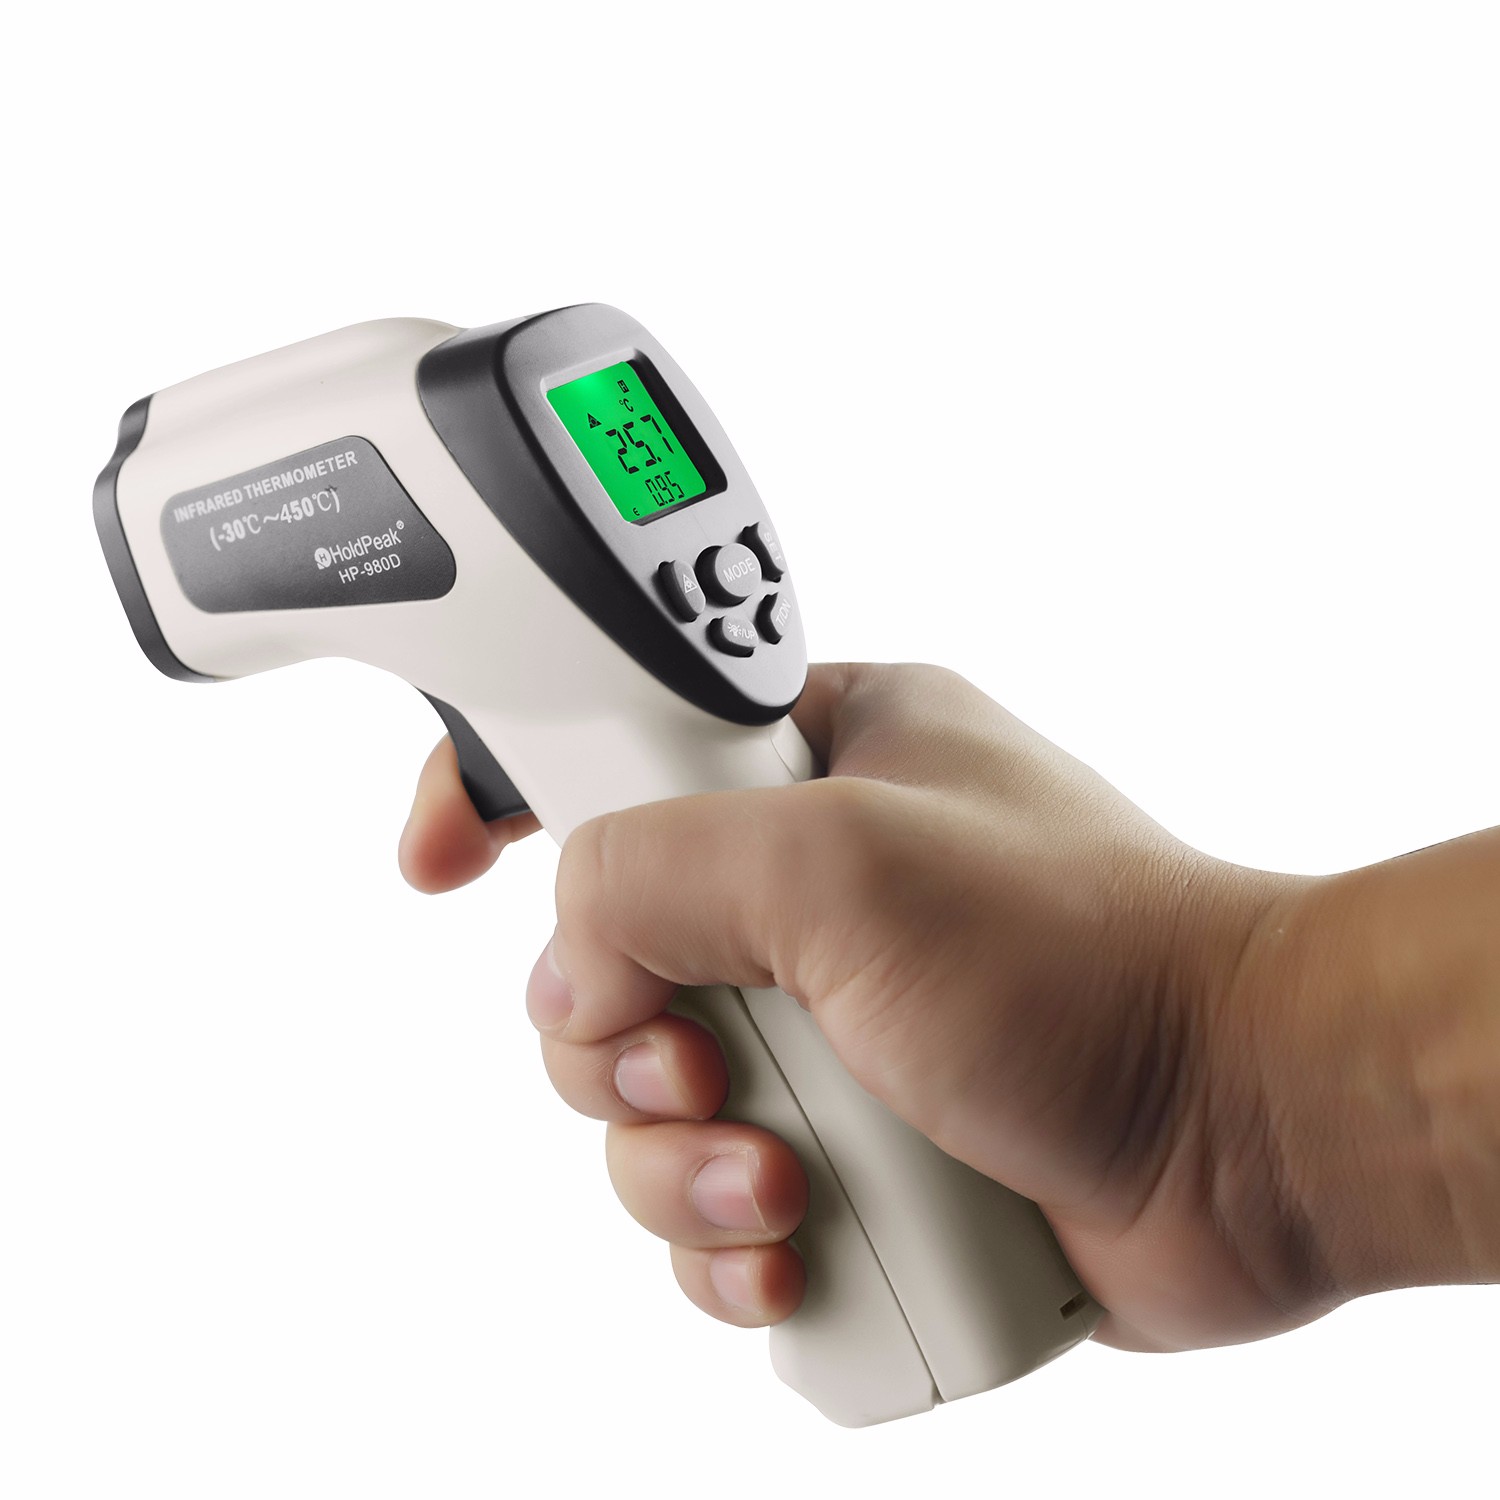 easy to use ir digital thermometer target manufacturers for inspection